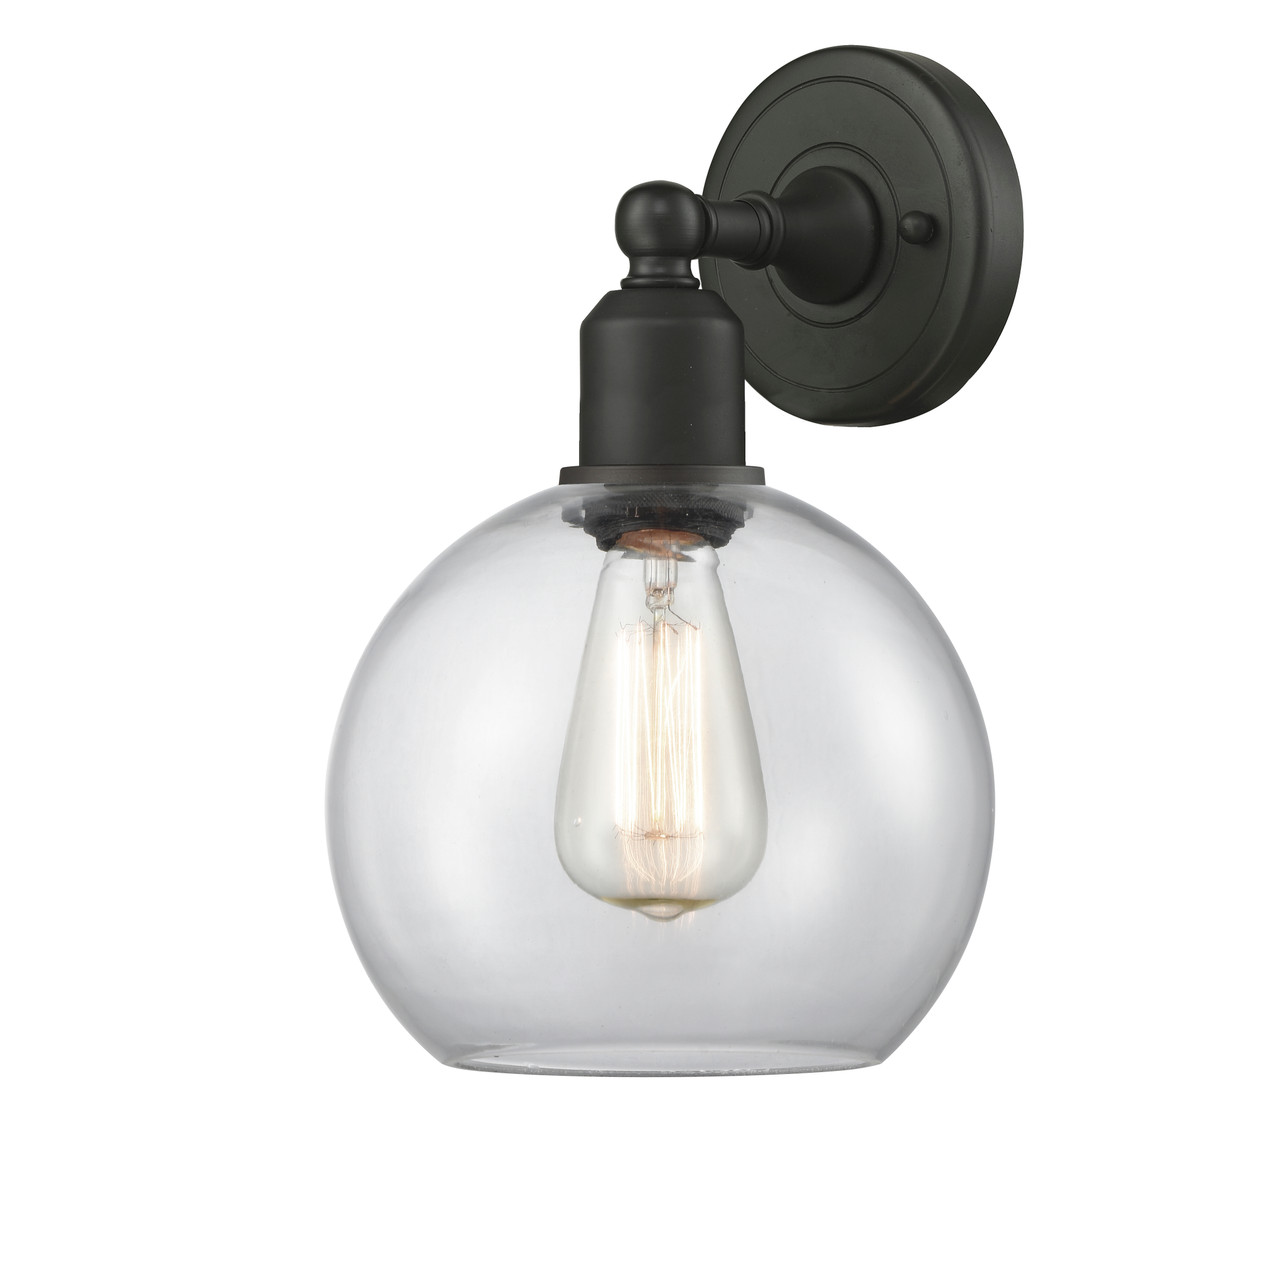 INNOVATIONS 900-1W-OB-G122 Sphere 1 Light Sconce part of the Austere Collection Oil Rubbed Bronze